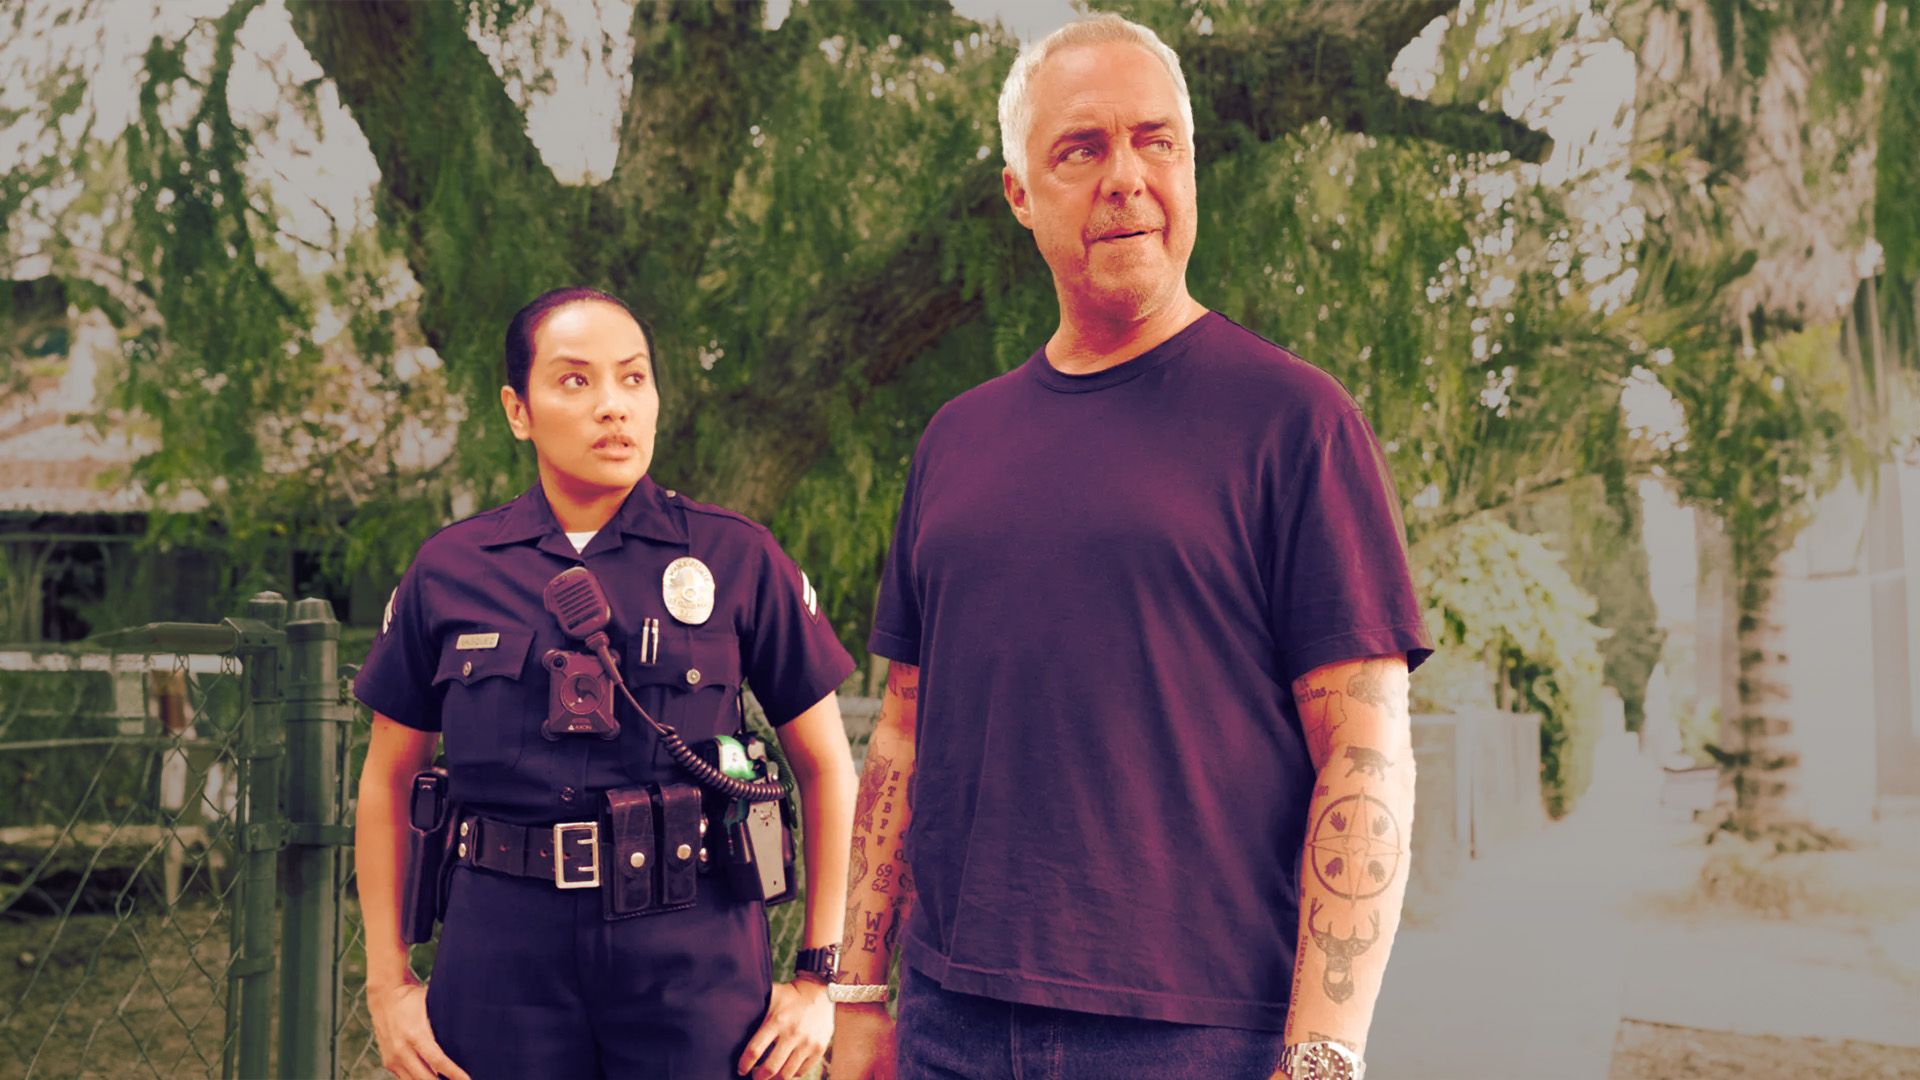 Why Bosch- Legacy Doesn't Live Up to the Original Series